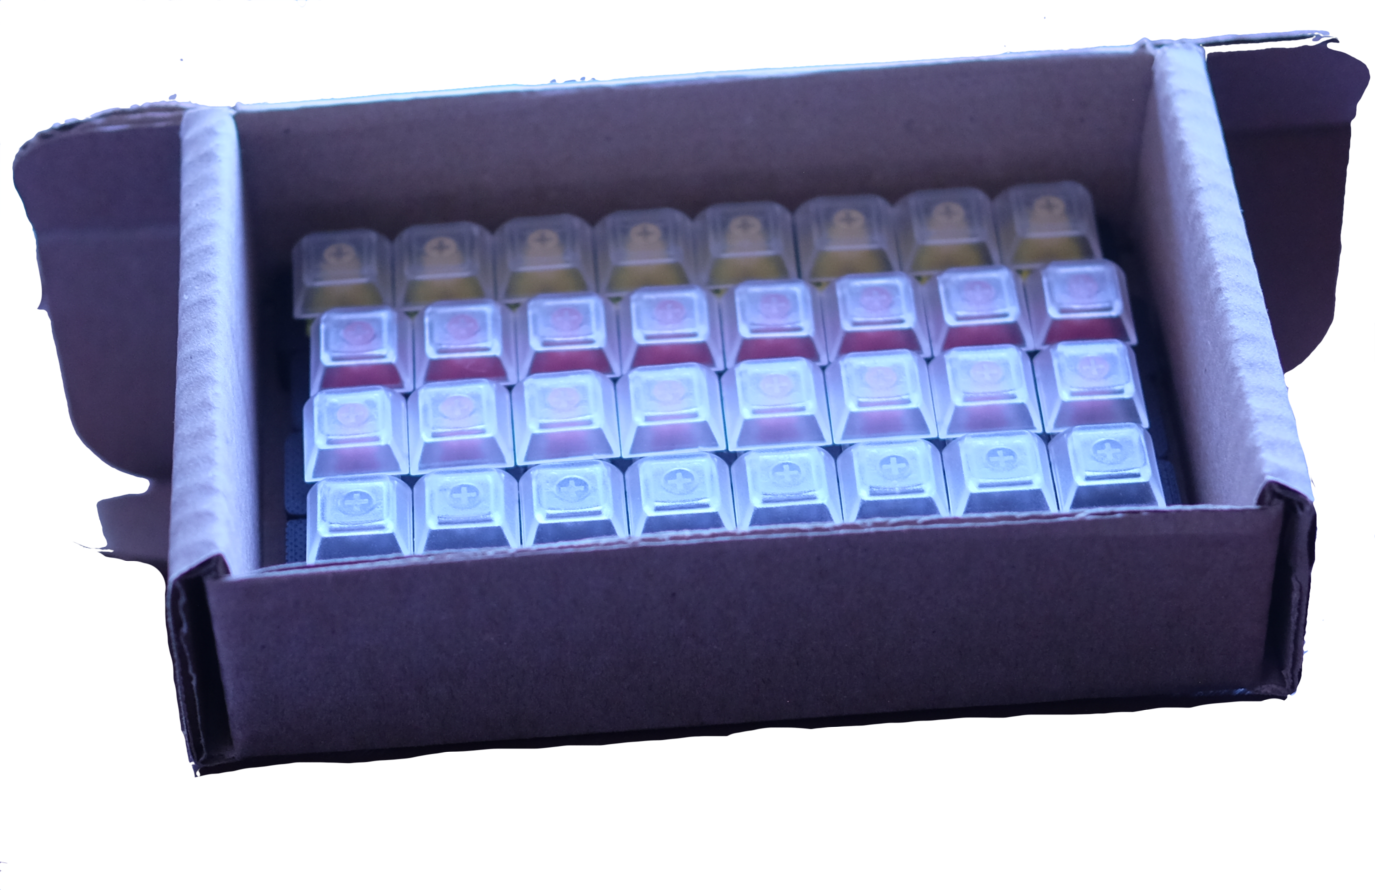 A box of switches